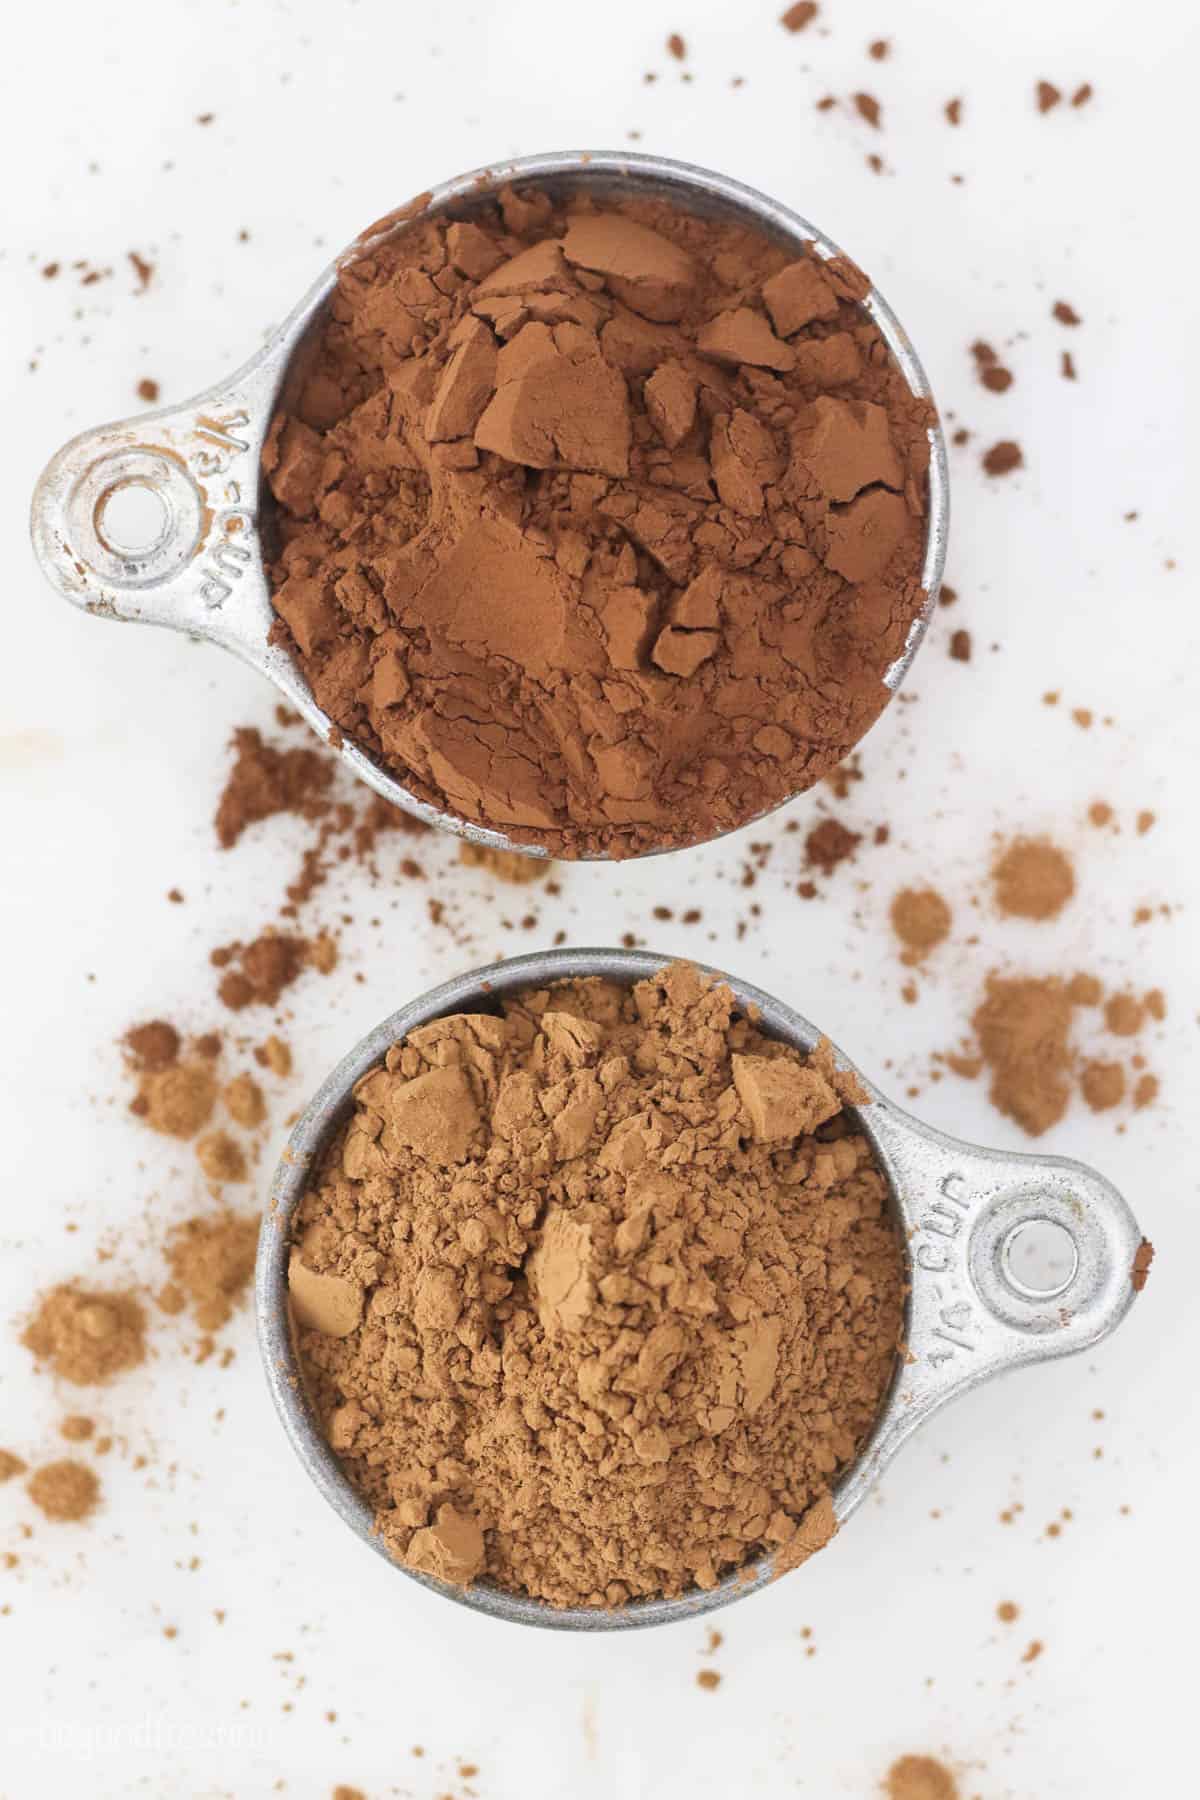 Two dishes filled with cocoa powder